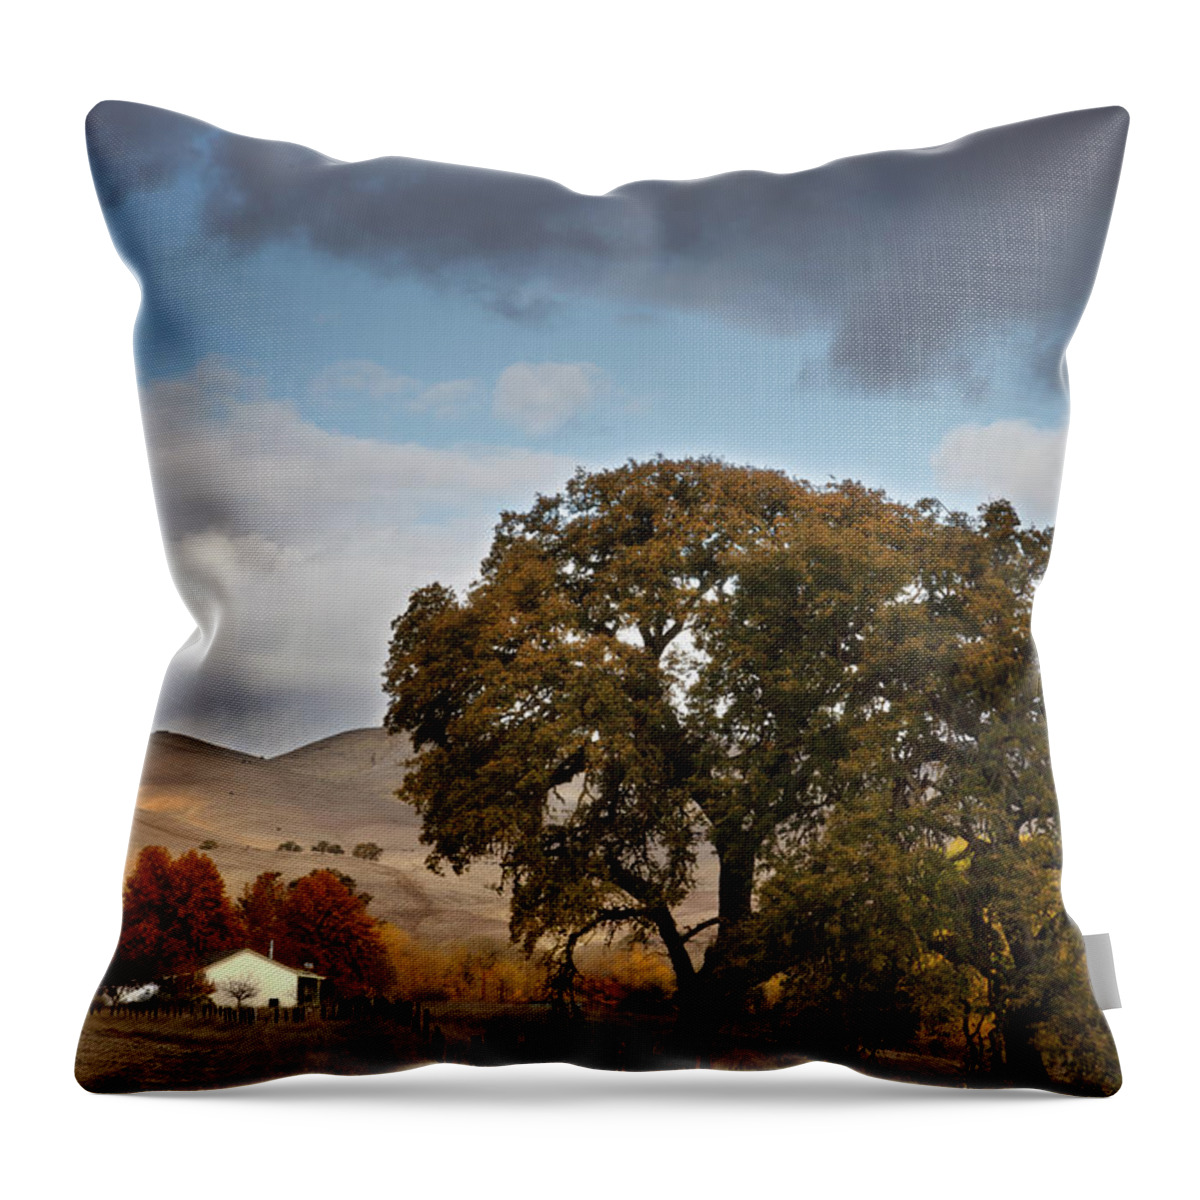  Throw Pillow featuring the photograph San Miguel #1 by Lars Mikkelsen